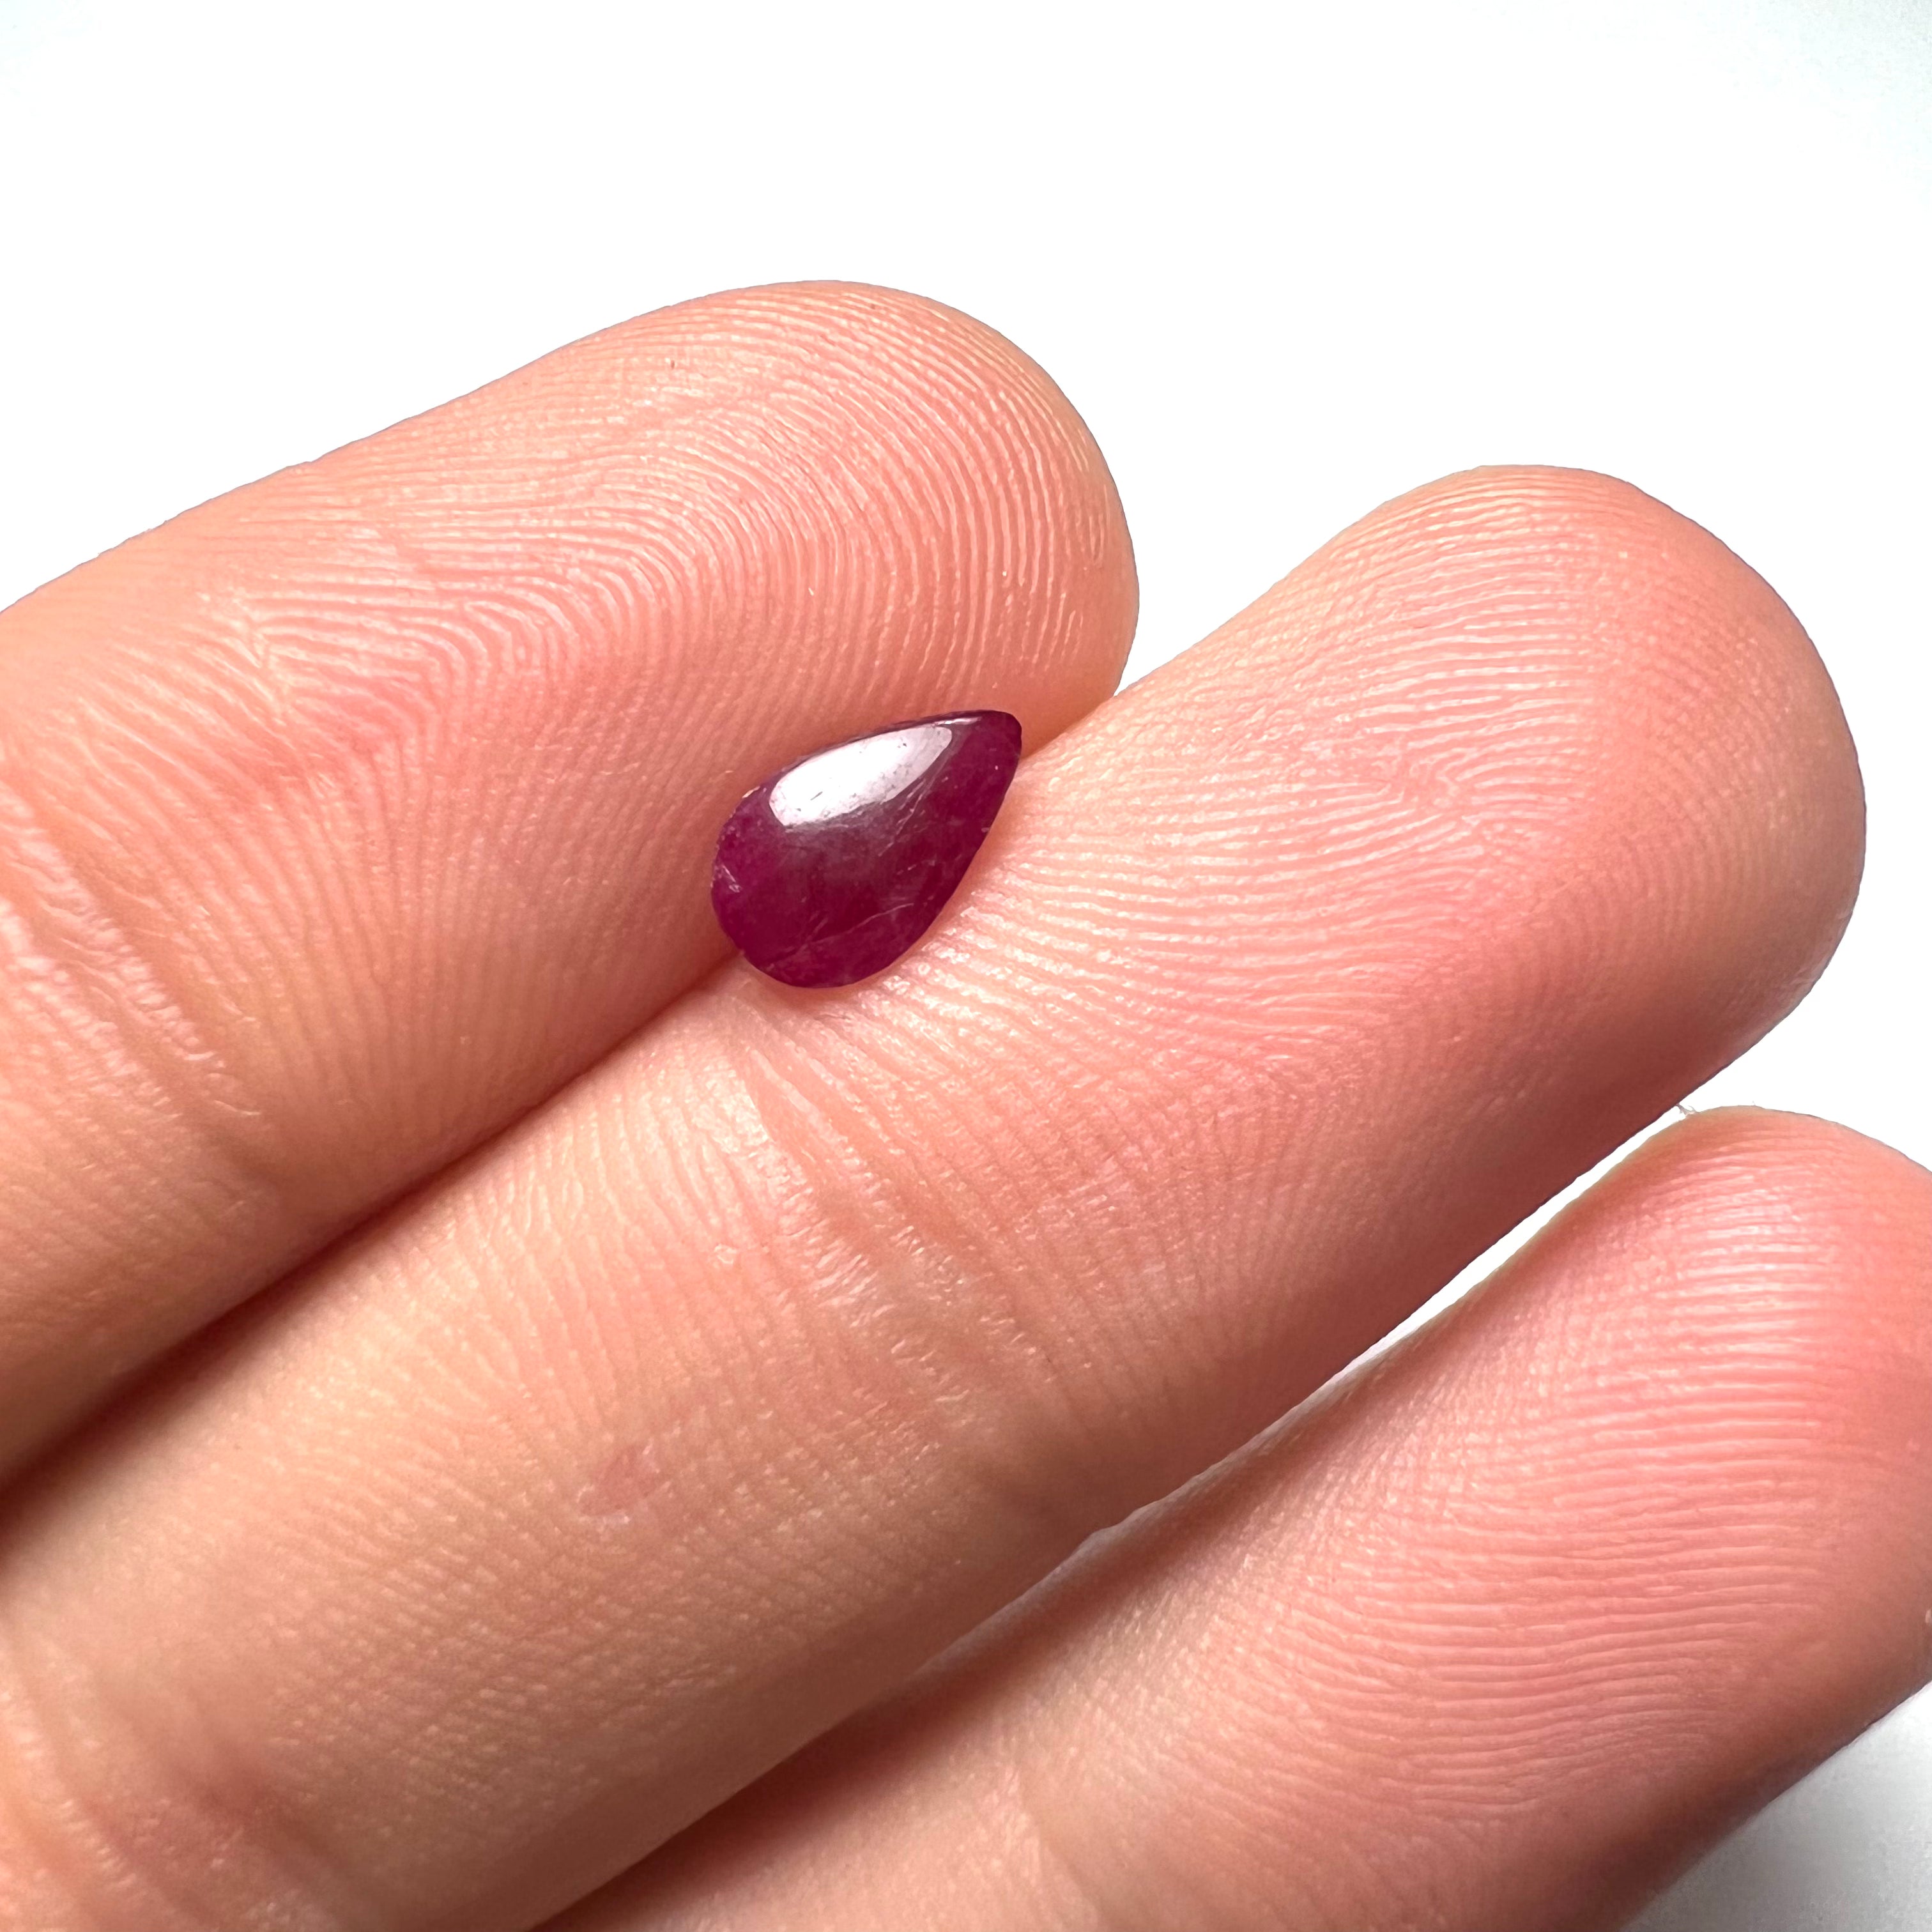 .89CTW Loose Natural Pear Ruby 7.5x4.2x2.2mm Earth mined Gemstone